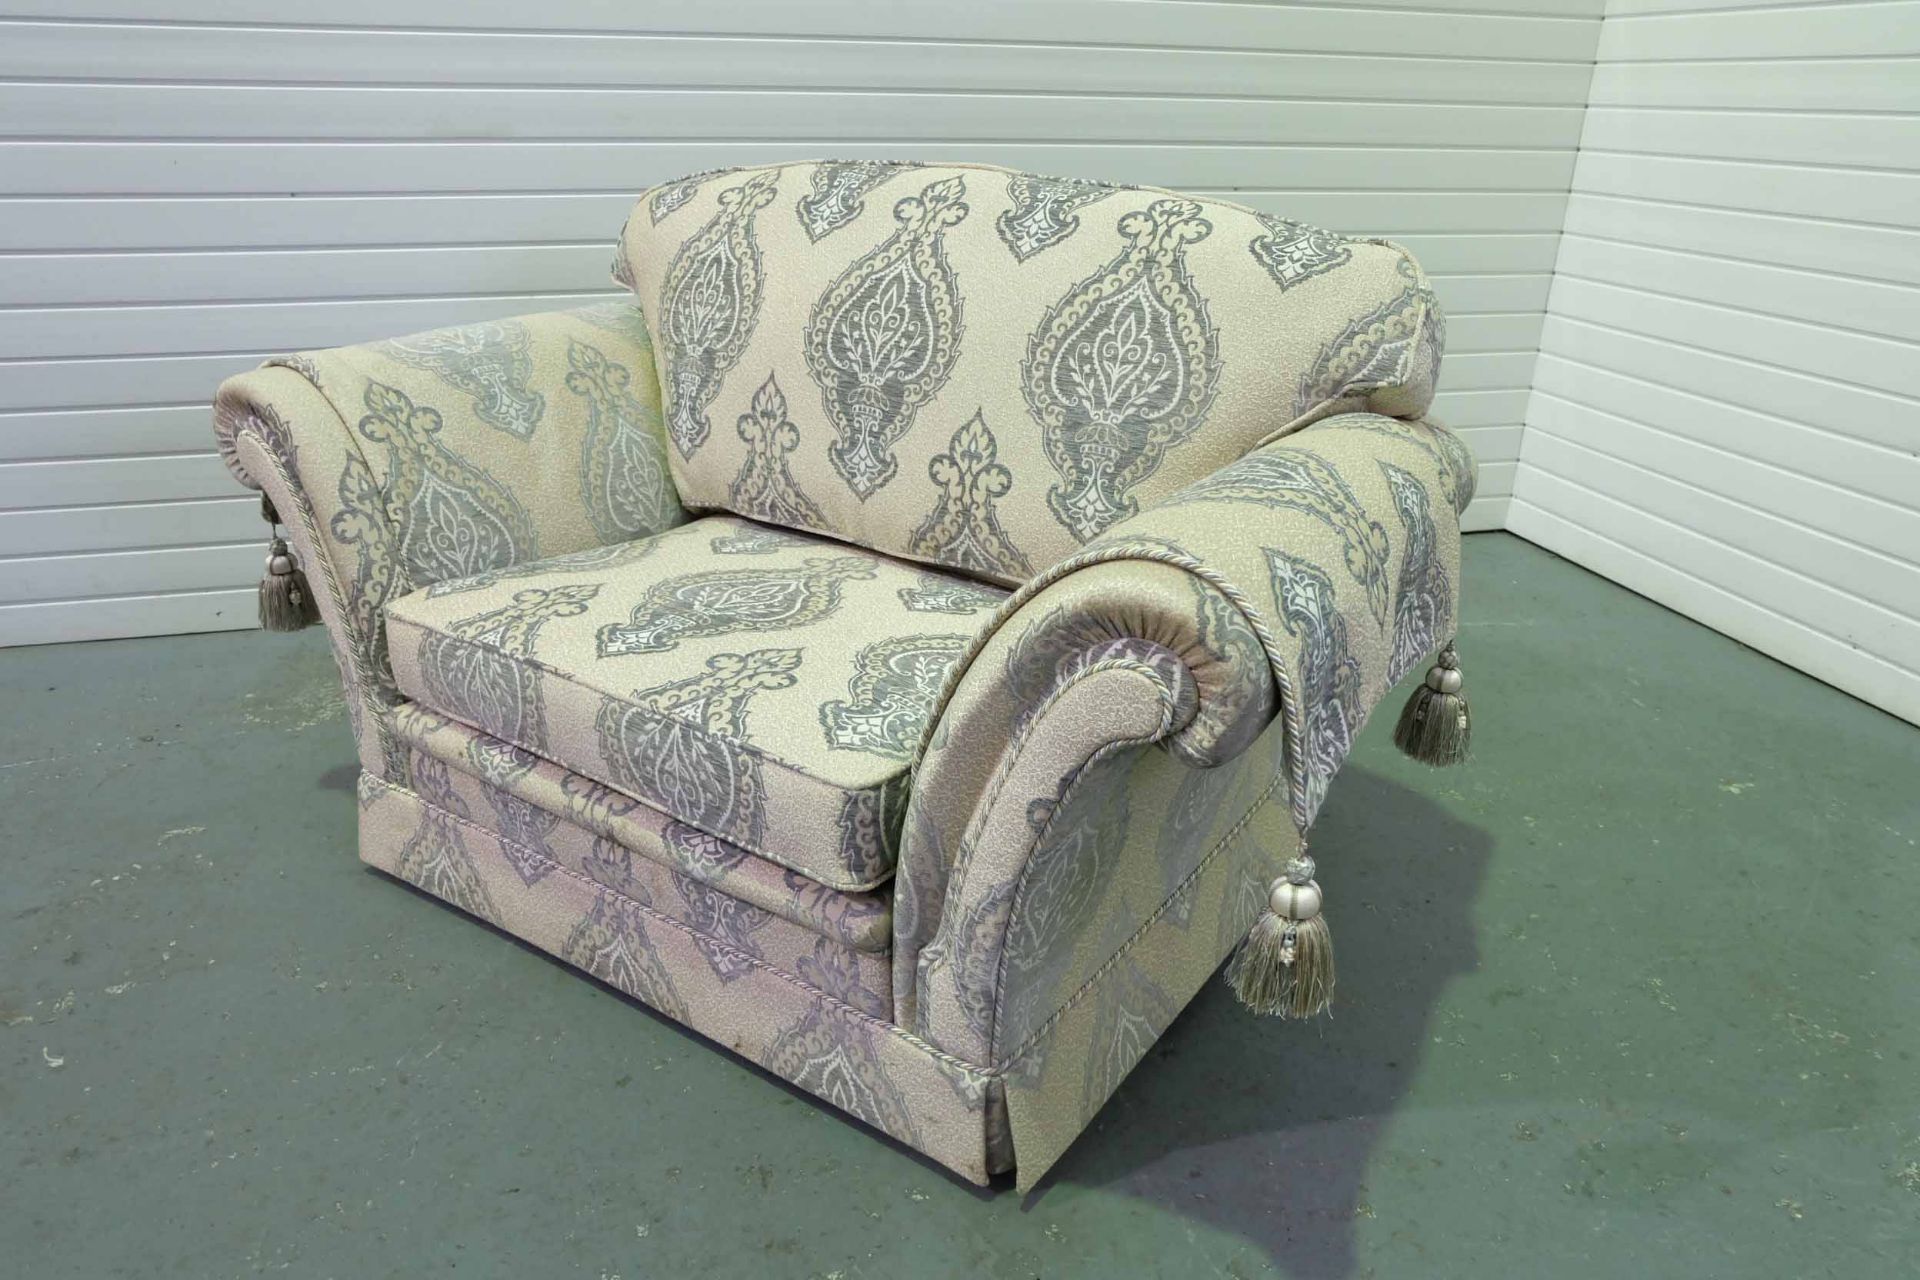 Steed Upholstery 'Kedleston' Range Fully Handmade Large 1.5 Seater Chair. With Valance & Arm Throws. - Image 2 of 4